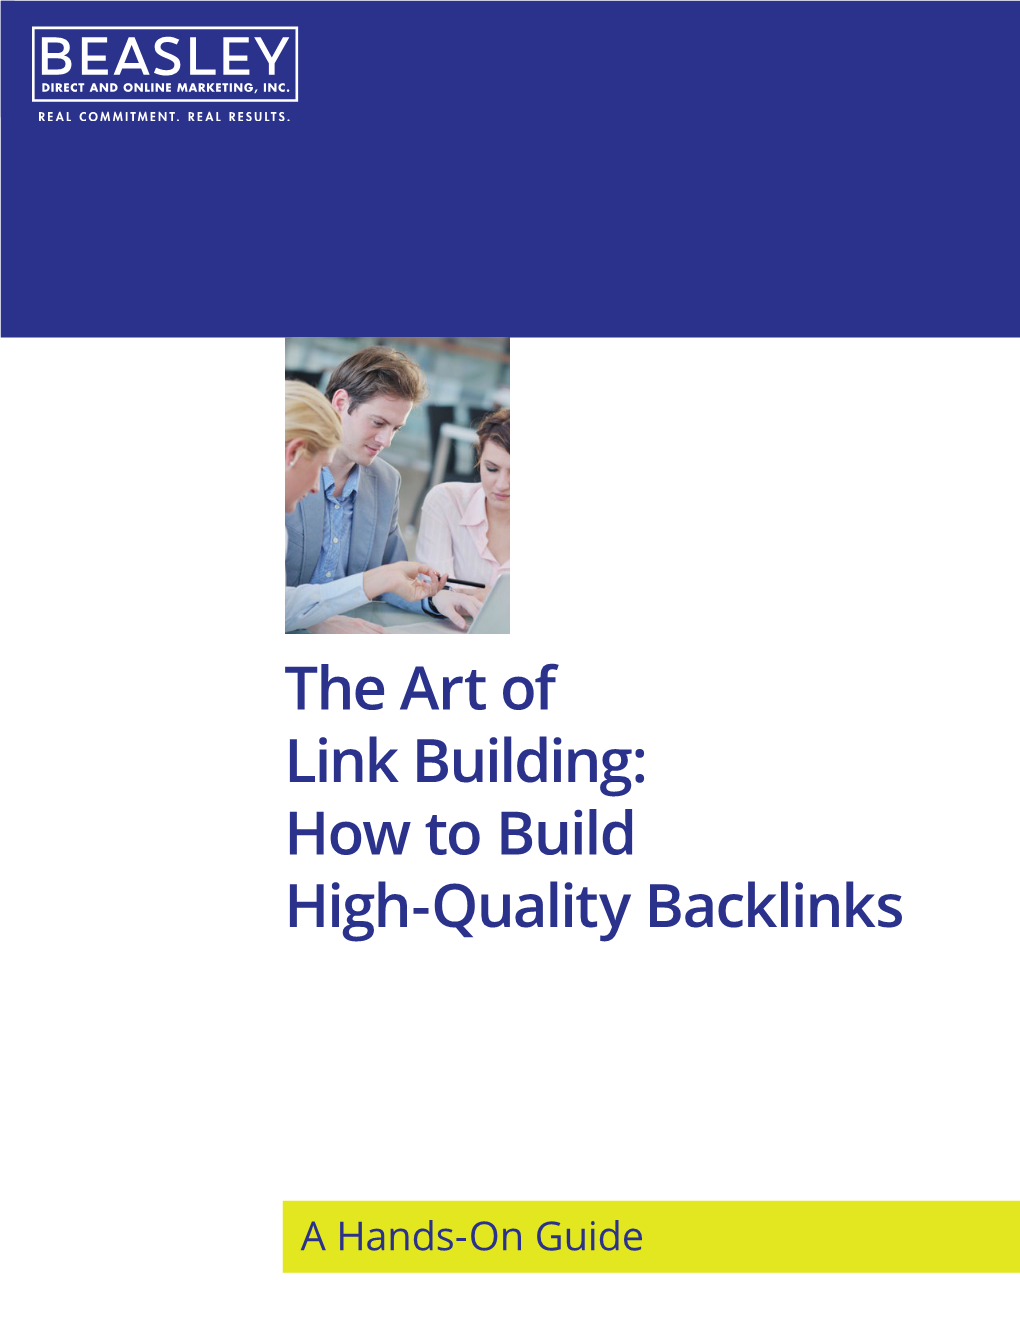 The Art of Link Building: How to Build High-Quality Backlinks